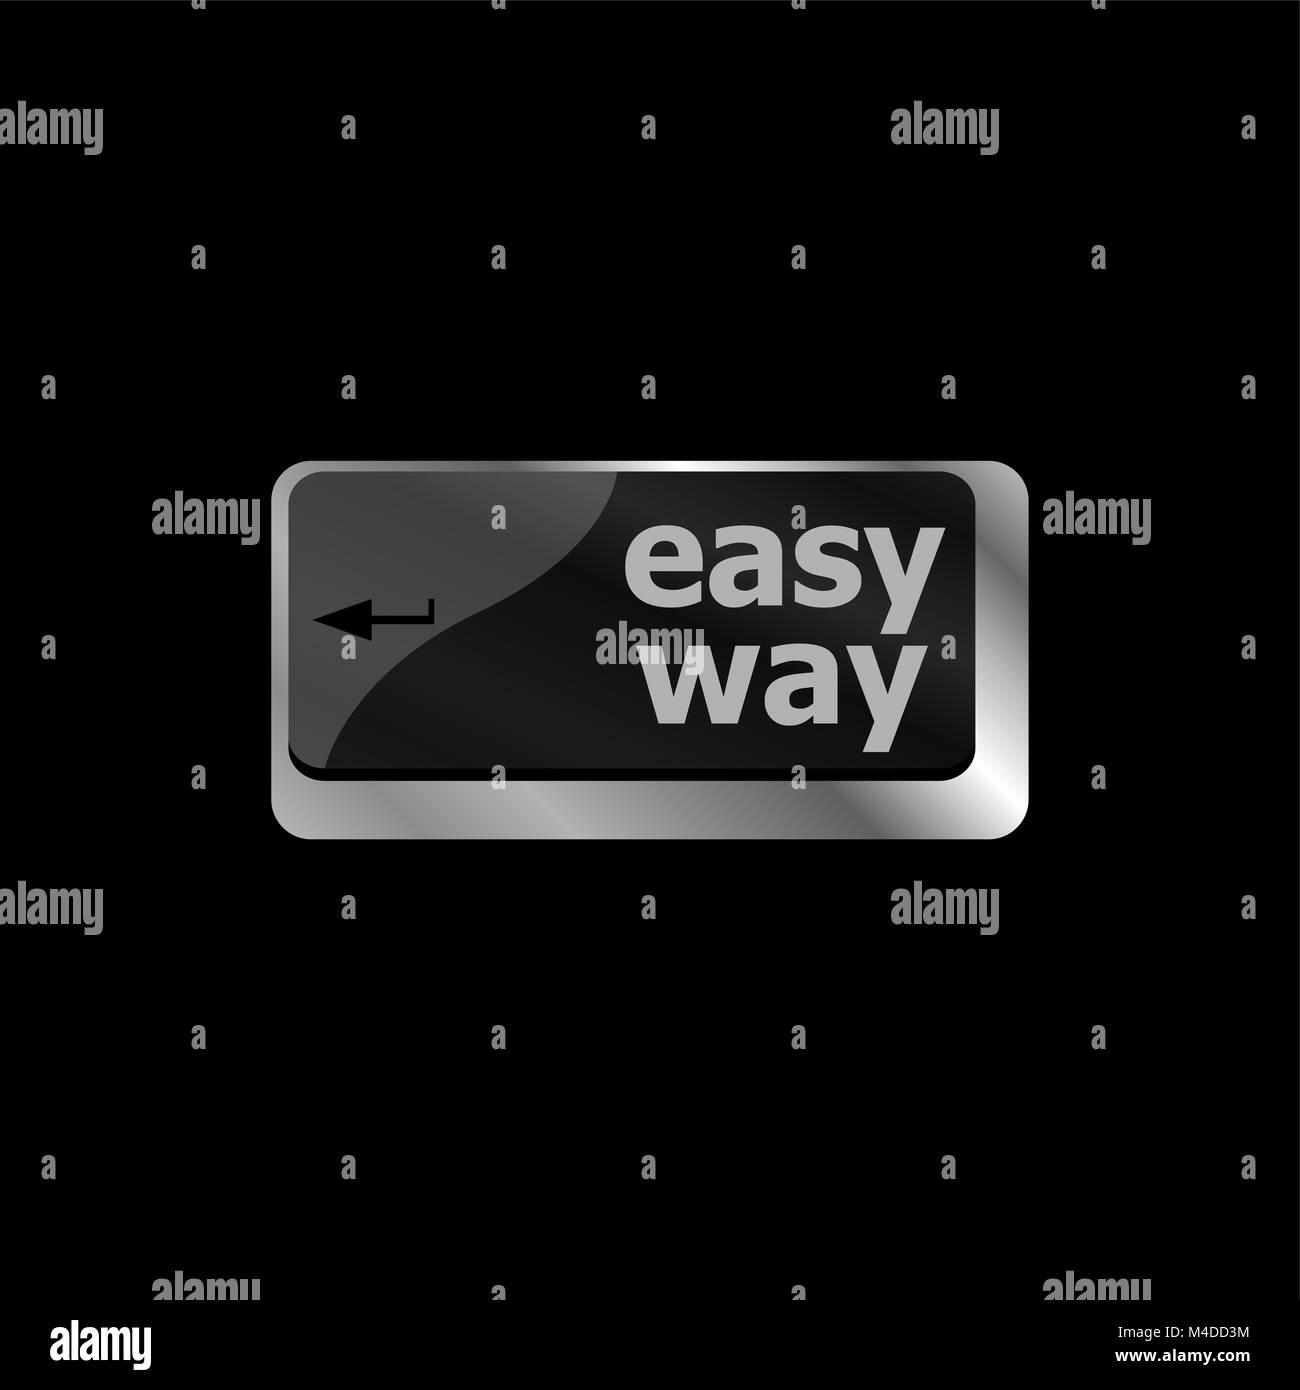 easy way button on the keyboard close-up Stock Photo